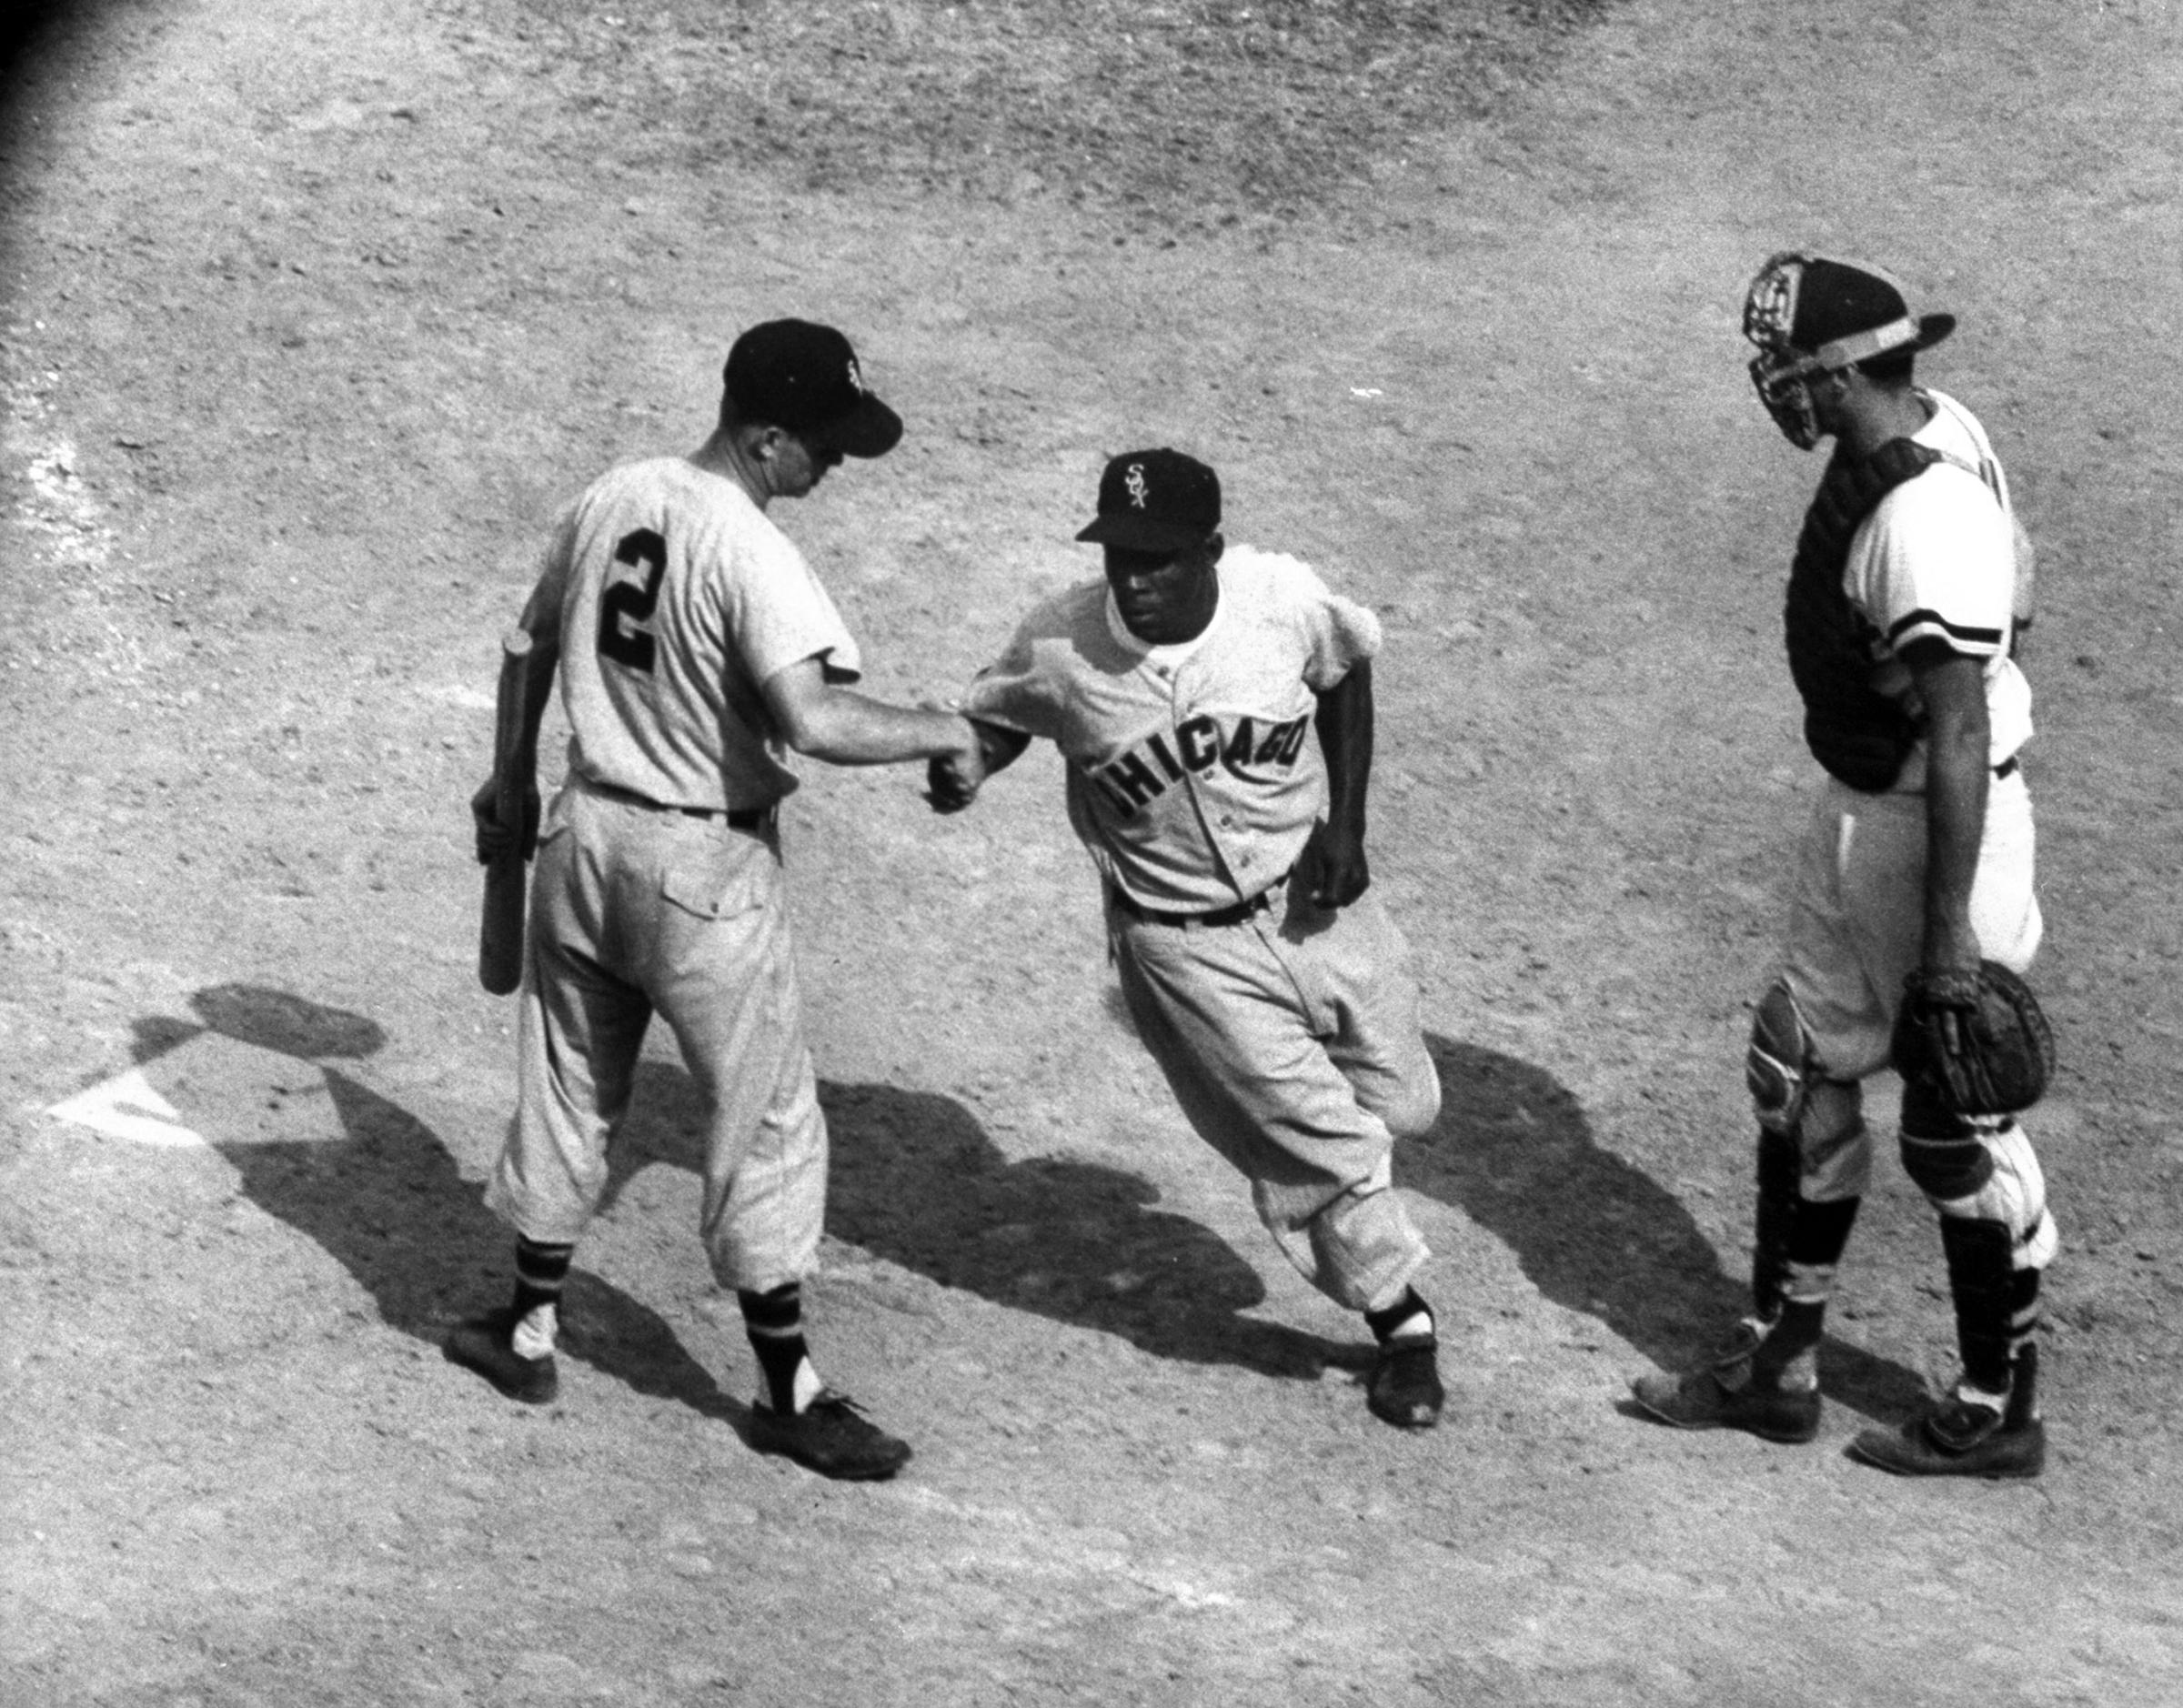 White Sox player, Nellie Fox, at home plate, shaking hands with Minnie Minoso, during game with Red Sox, 1959.